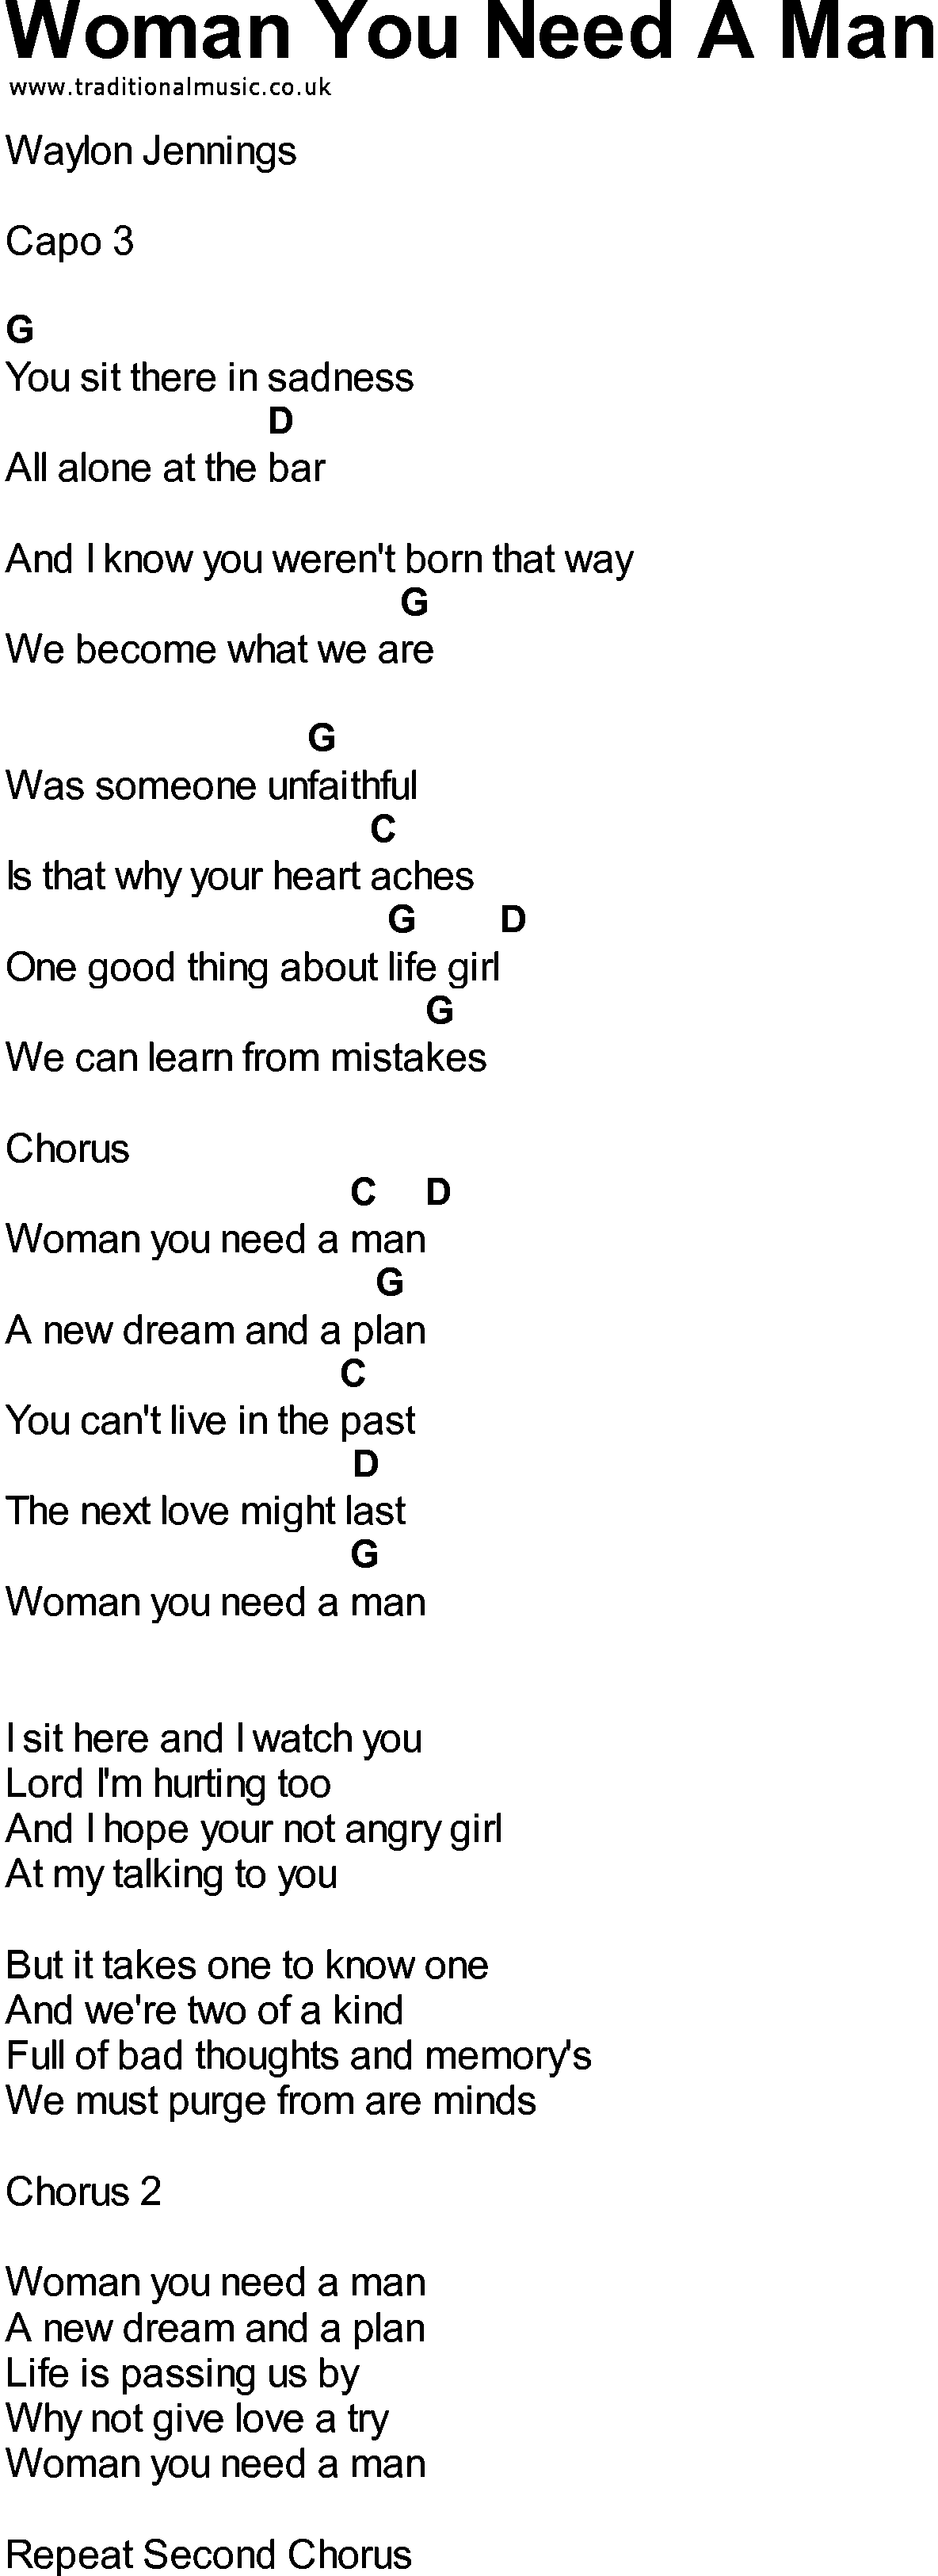 Bluegrass songs with chords - Woman You Need A Man